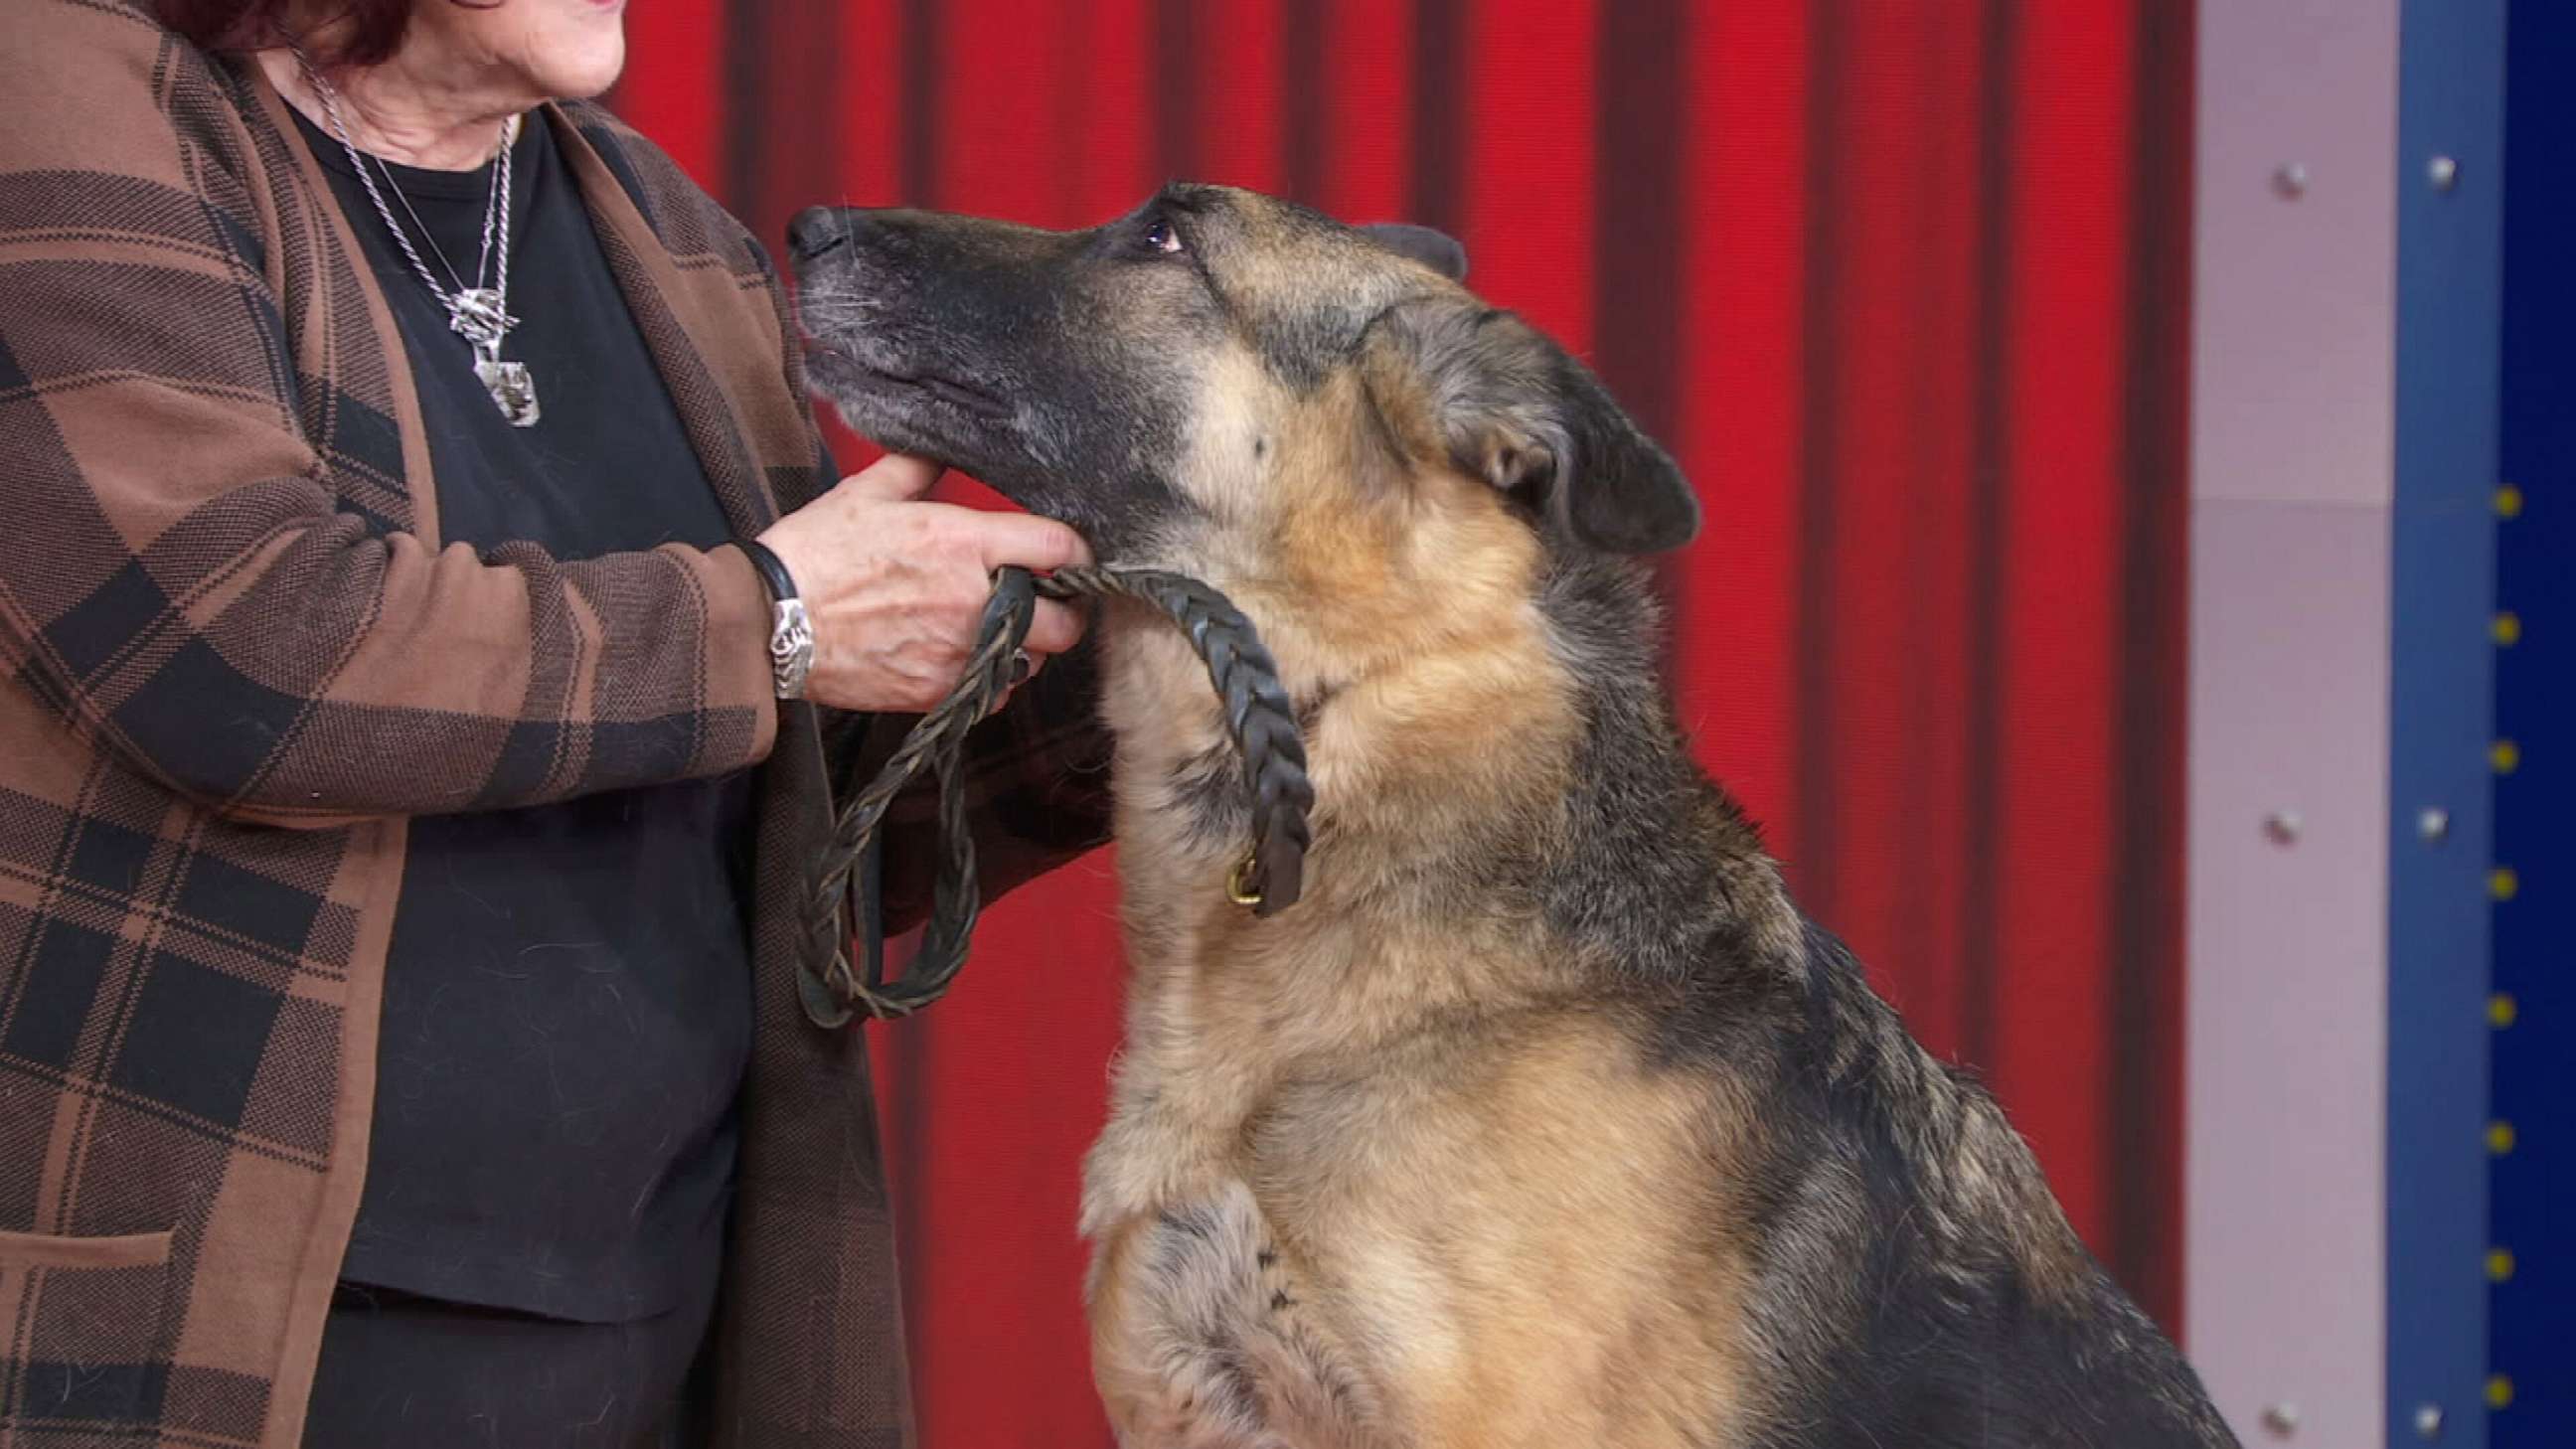 PHOTO: In 4th place, we have the German shepherd - that's Flirt.